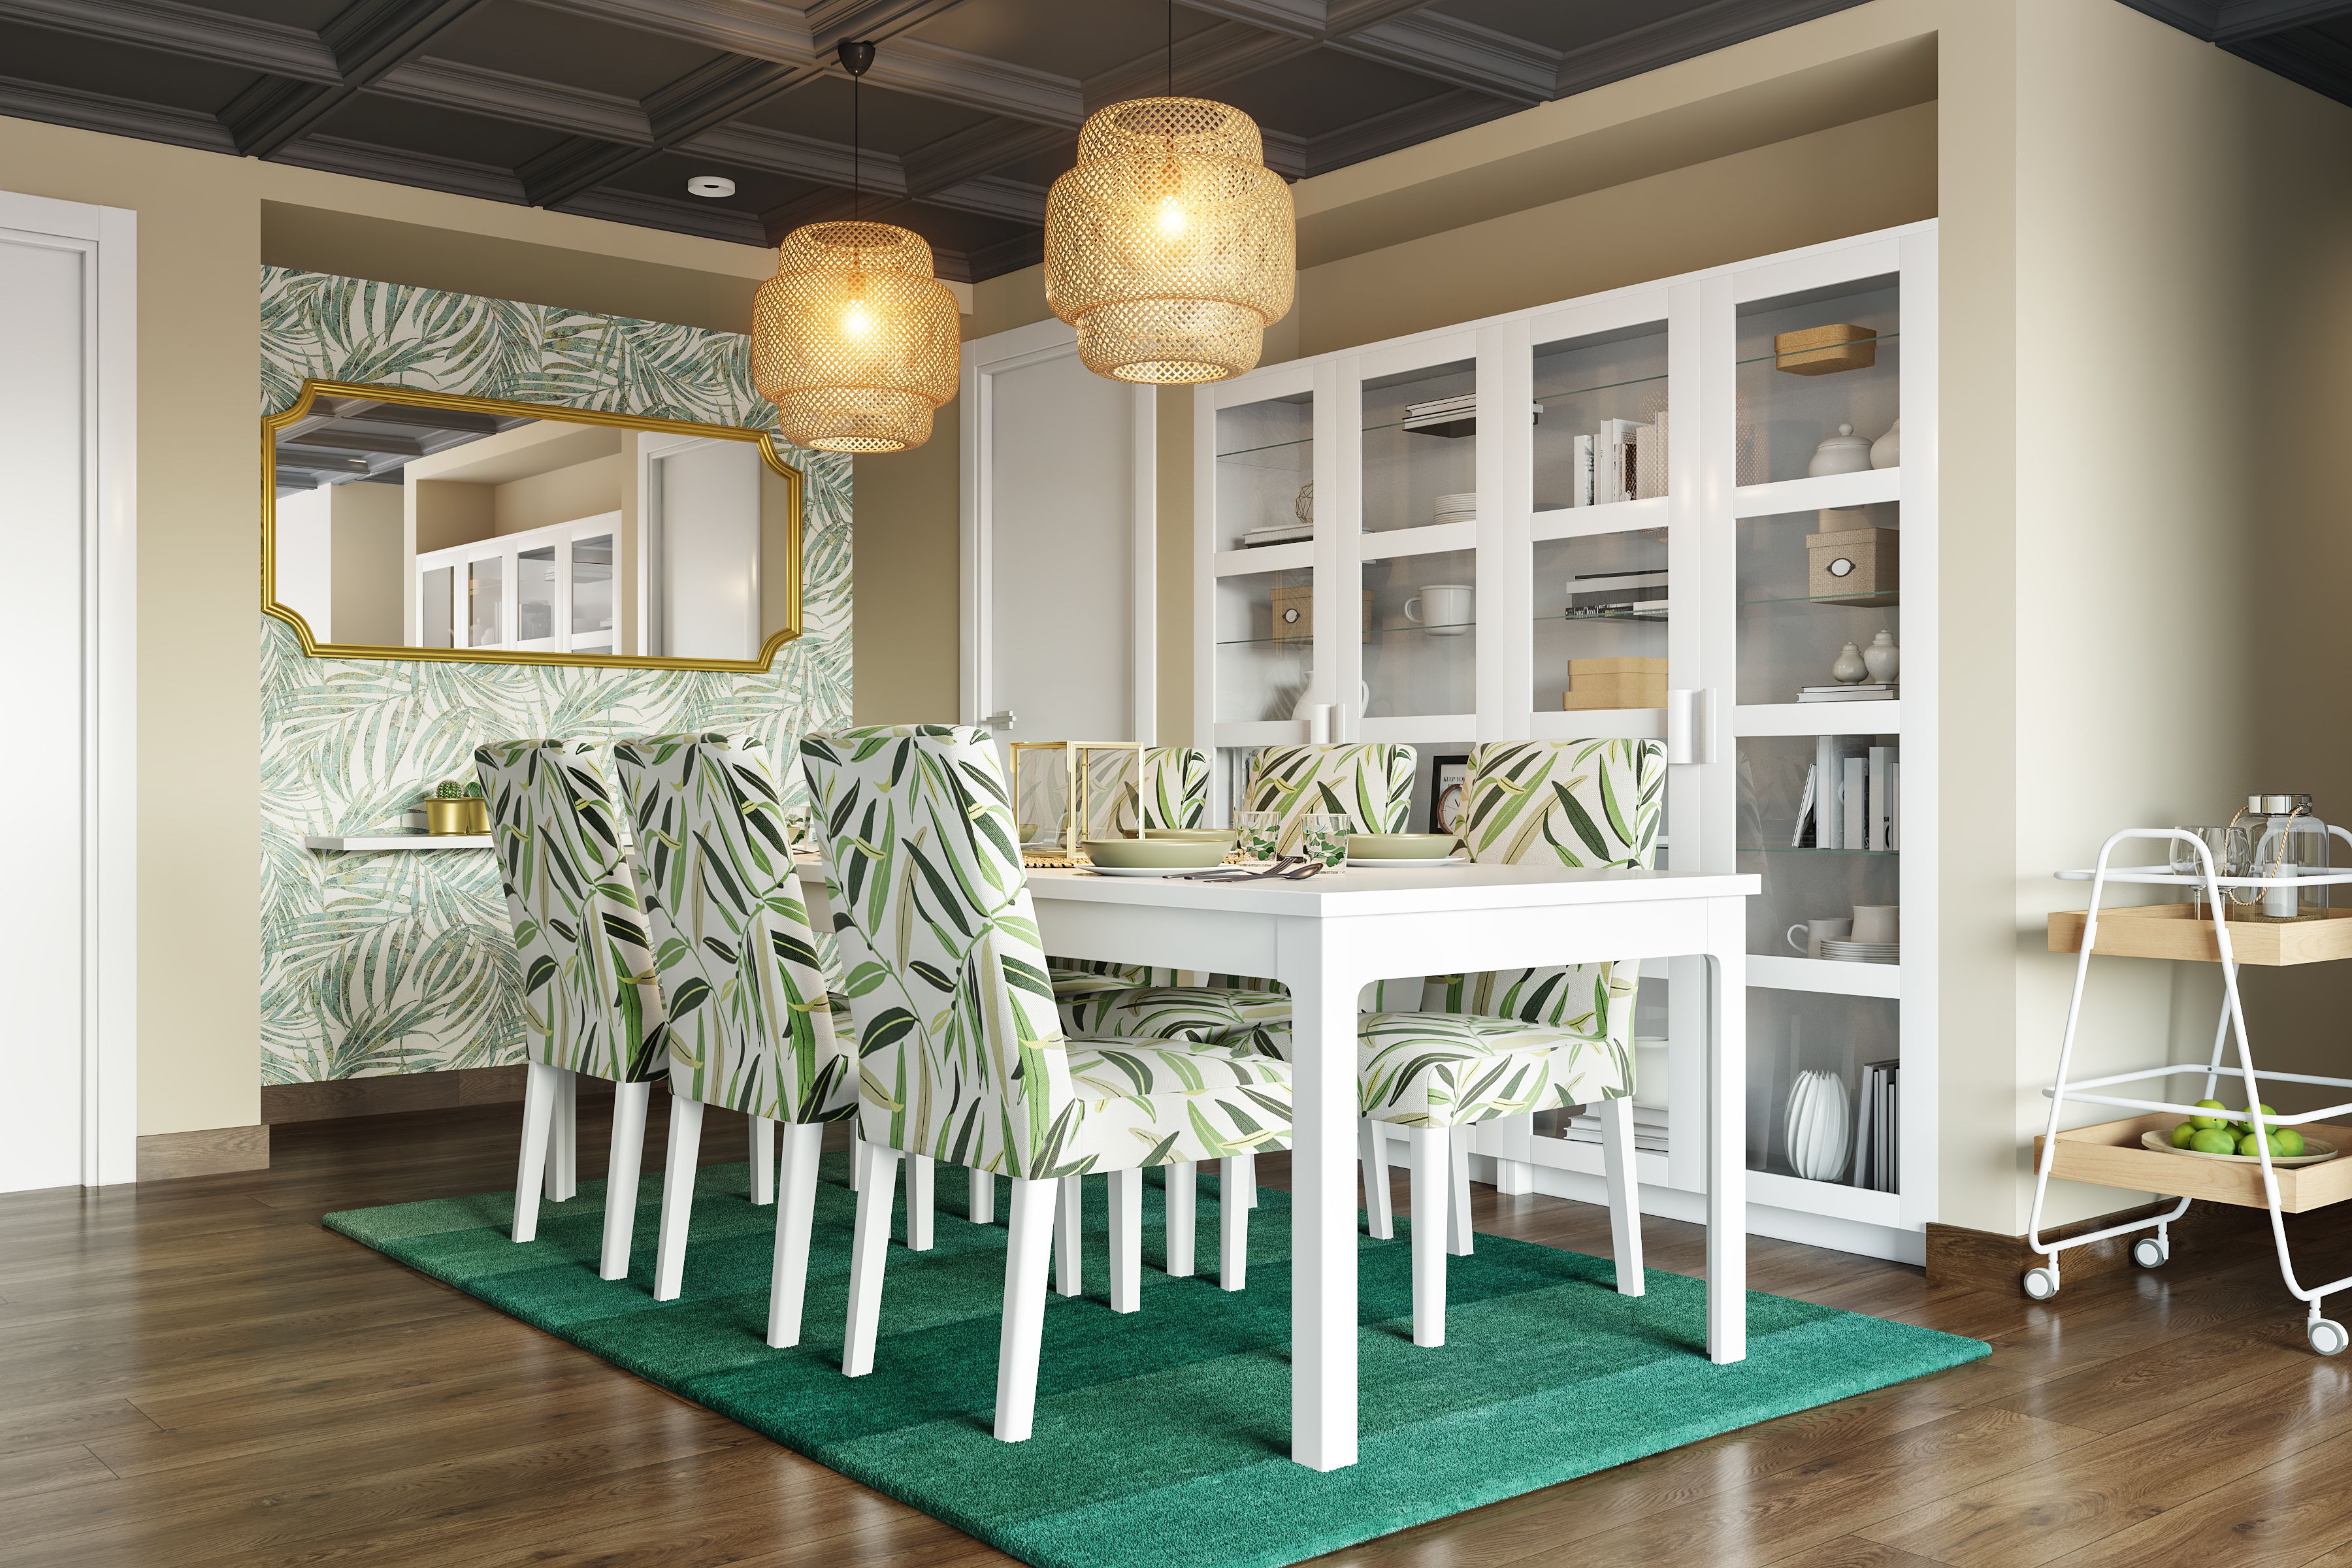 Contemporary Dining Room Design With Floral Chairs And Wallpaper